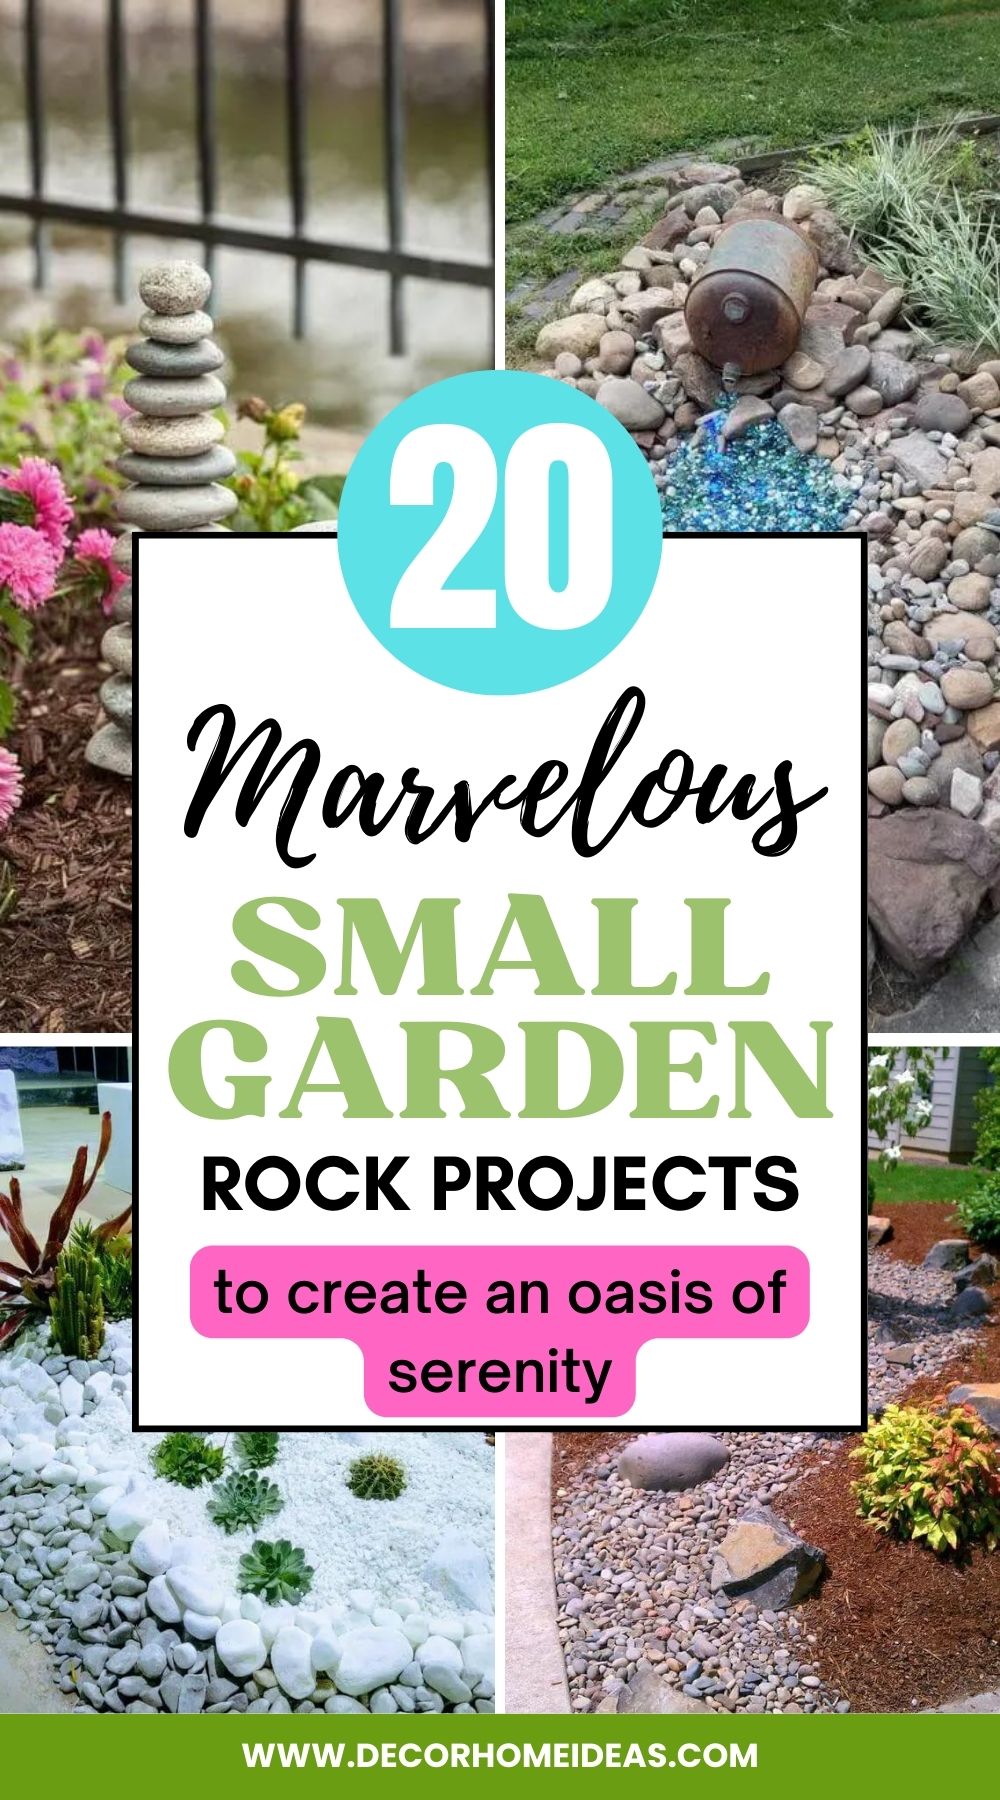 Transform your small garden into a unique and beautiful outdoor space with these 20 marvelous rock projects.